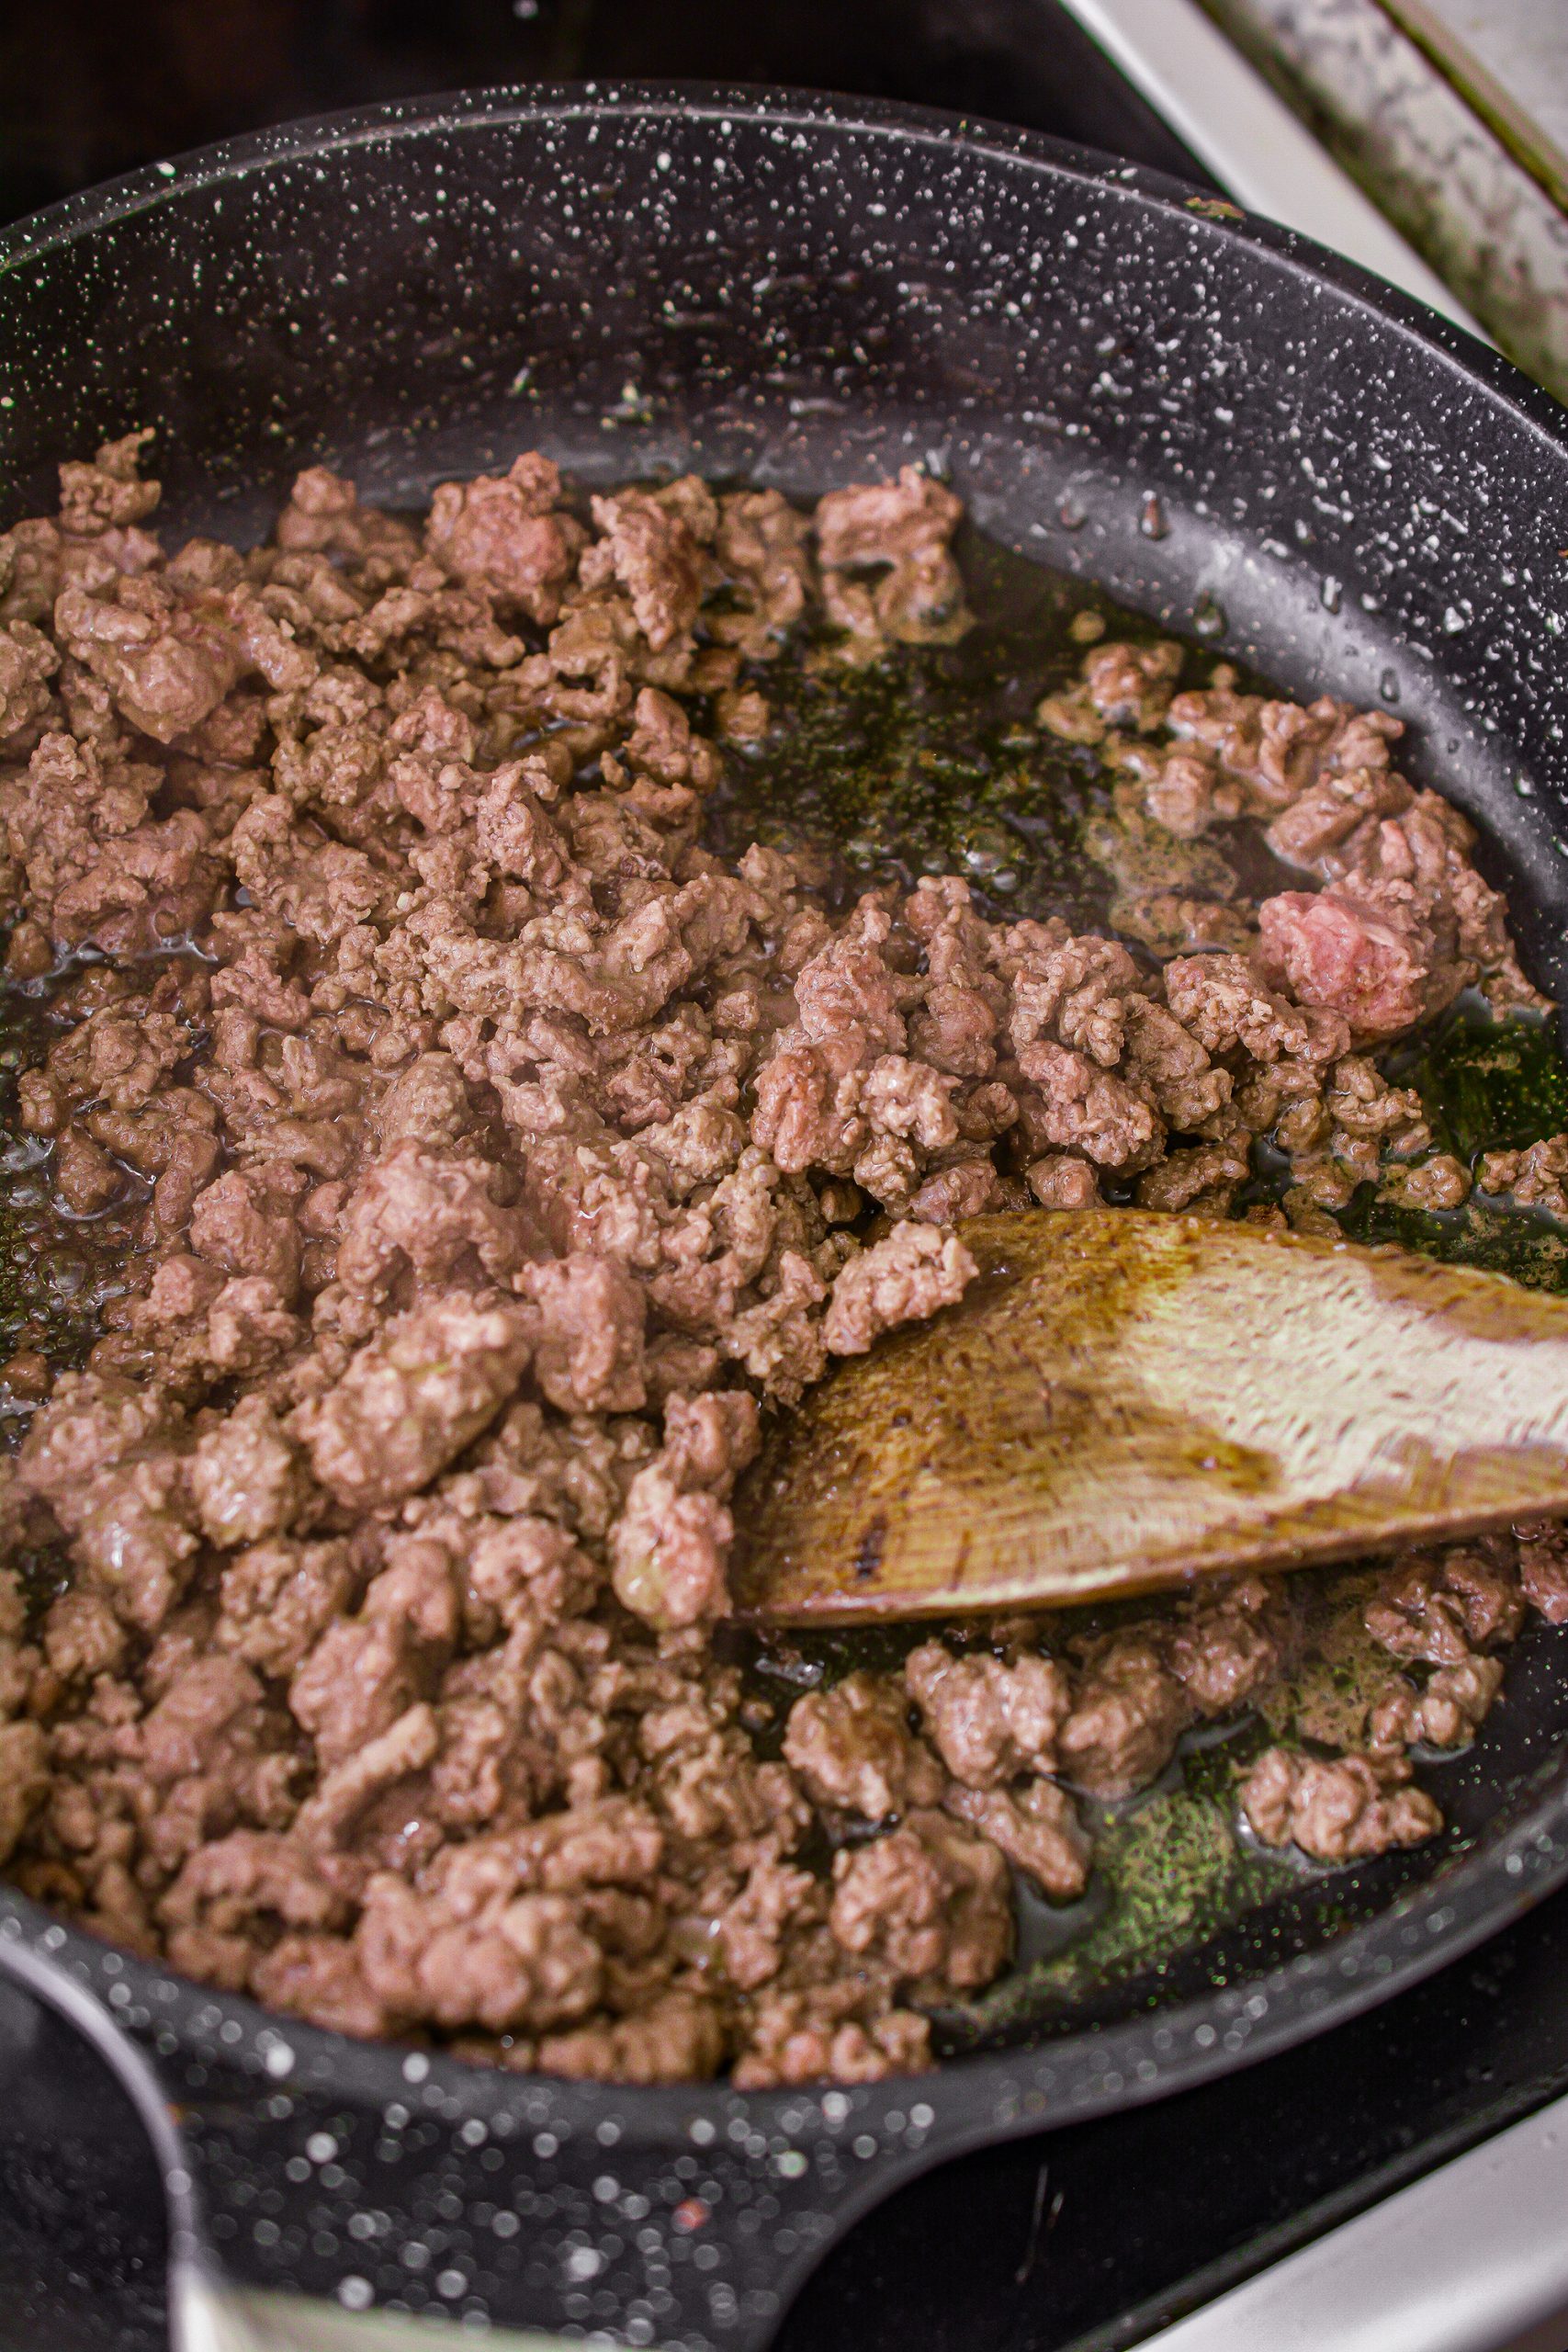 Add the ground beef to a skillet over medium-high heat on the stove, and cook until completely browned